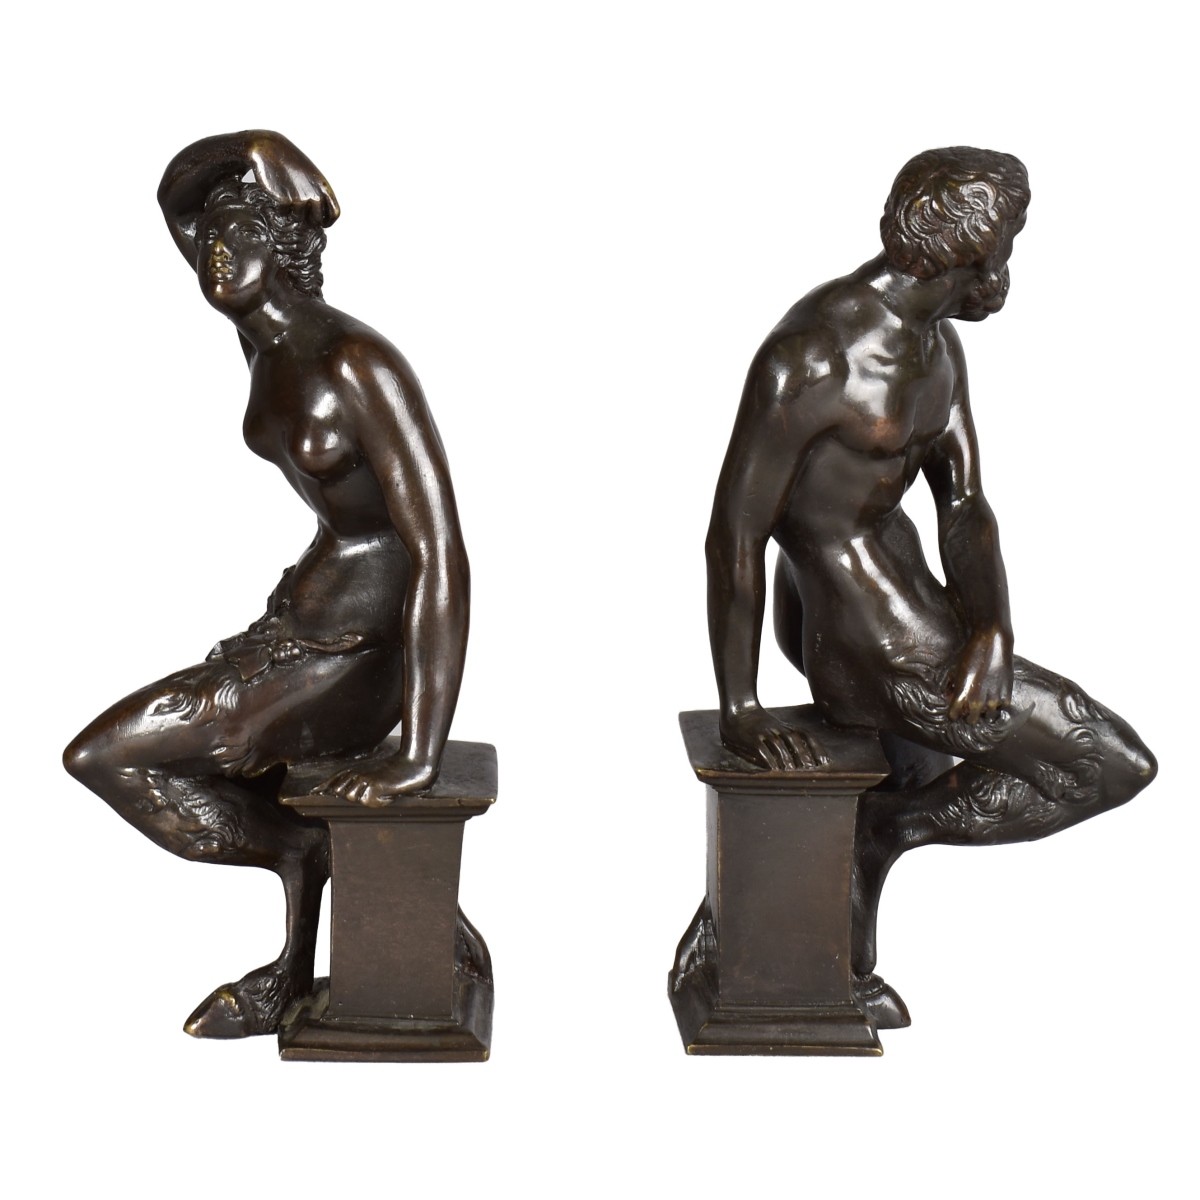 Pair of Neoclassical Style Sculptures